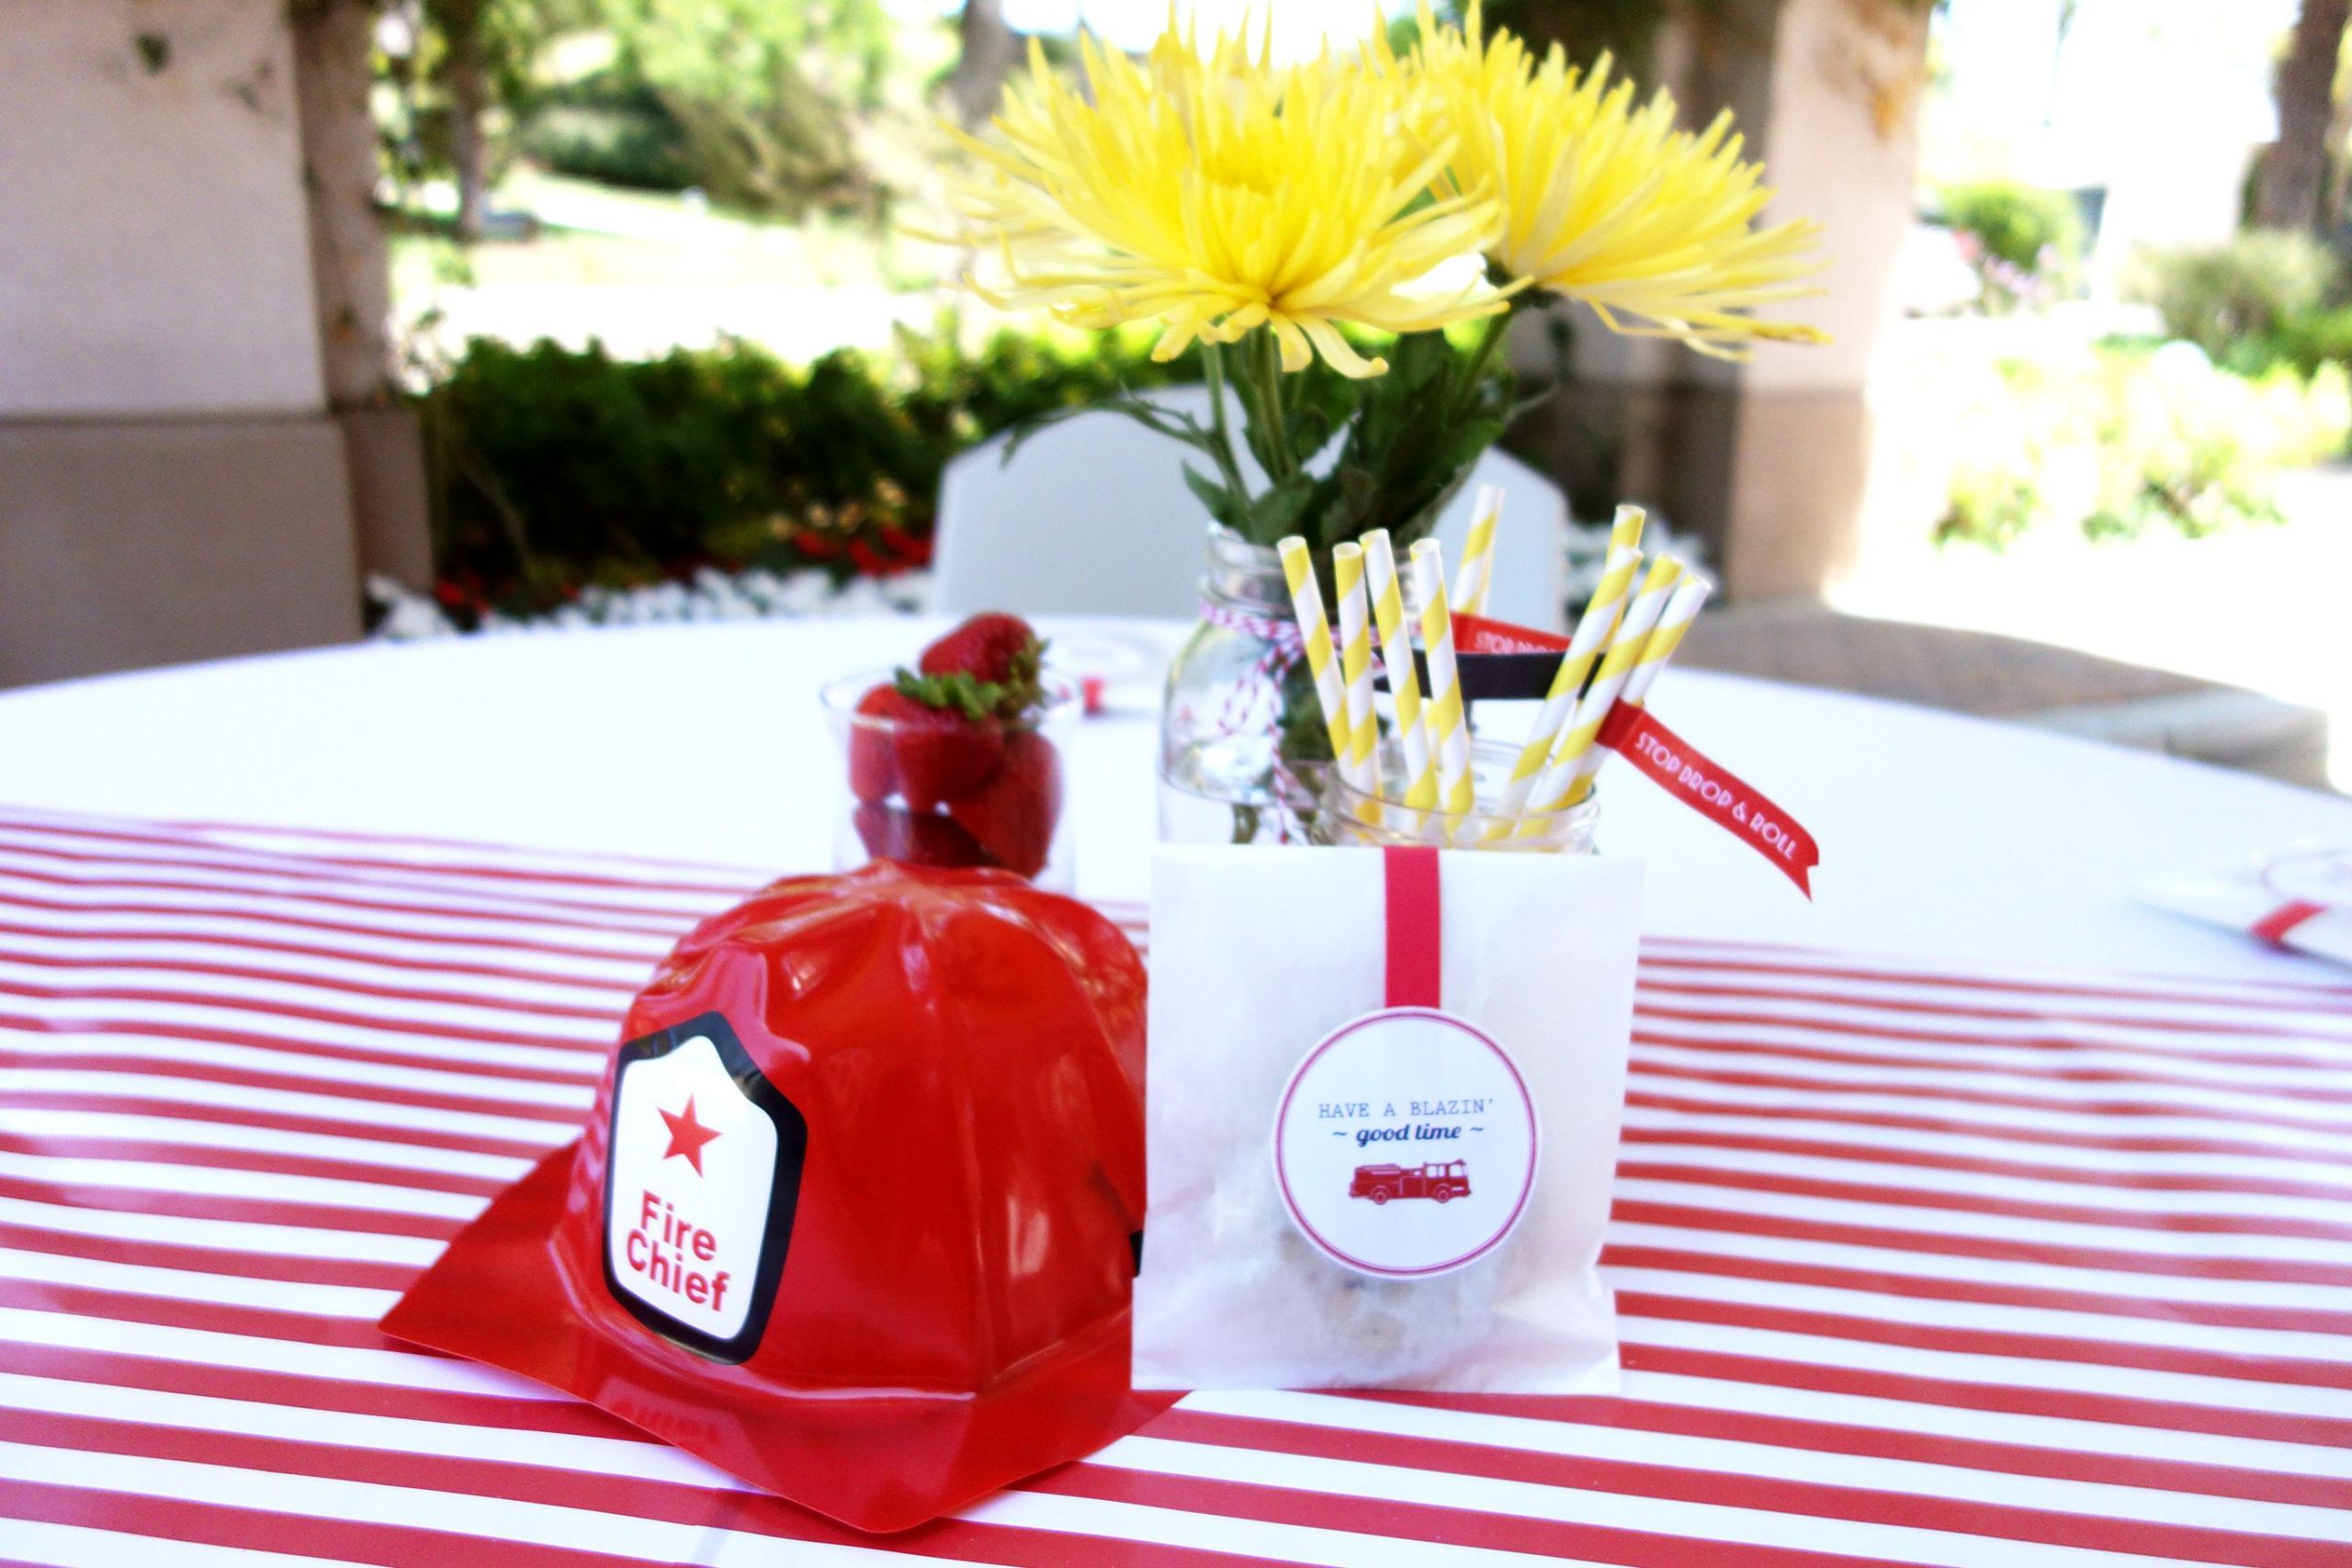 Firefighter Graduation Party Ideas
 Firefighter Party Adult Tablescapes